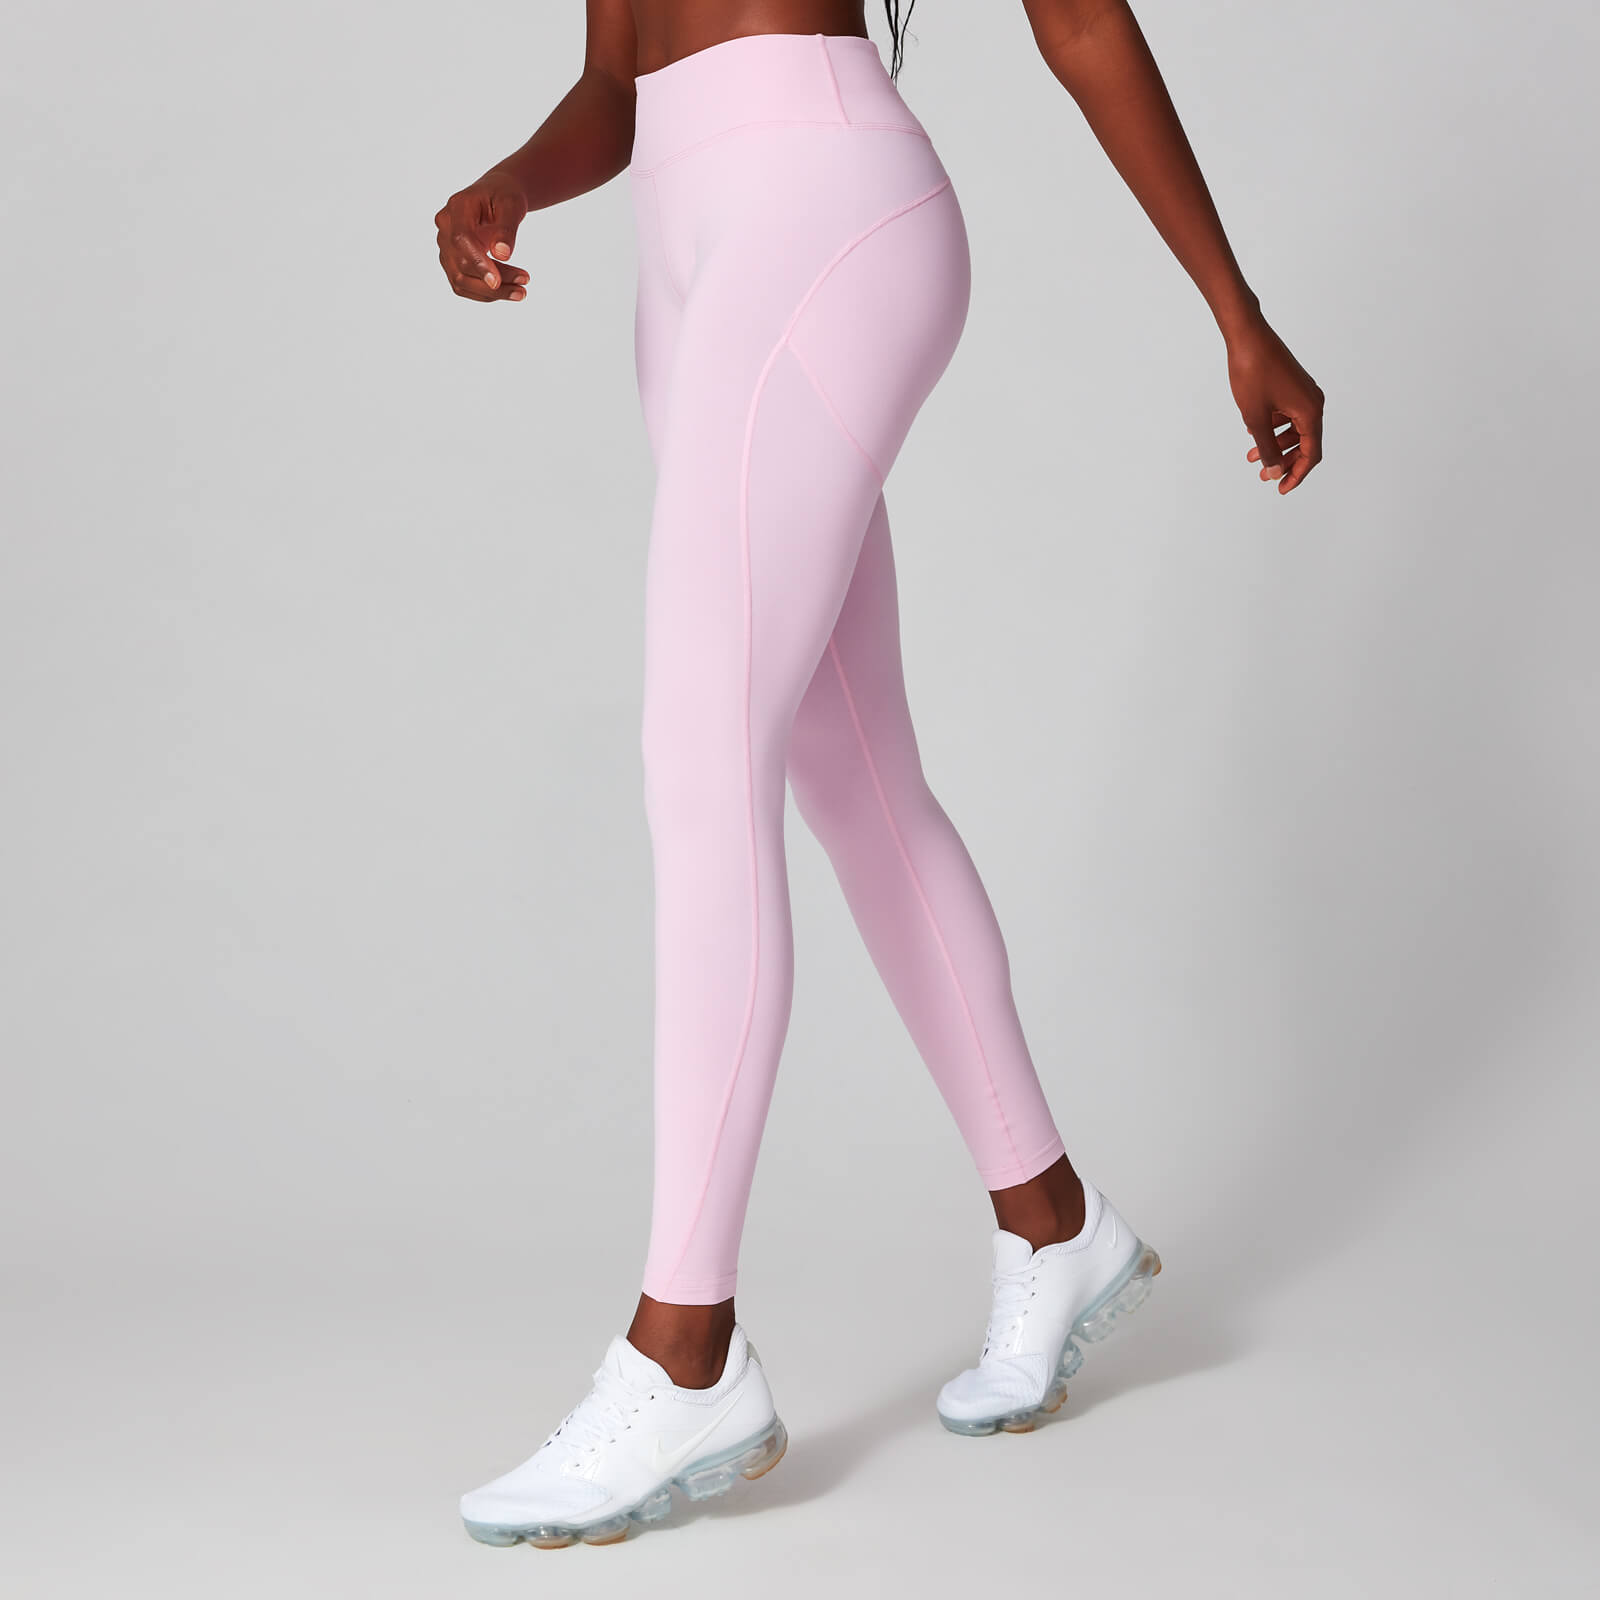 MP Power Leggings - Orchid Ice - L